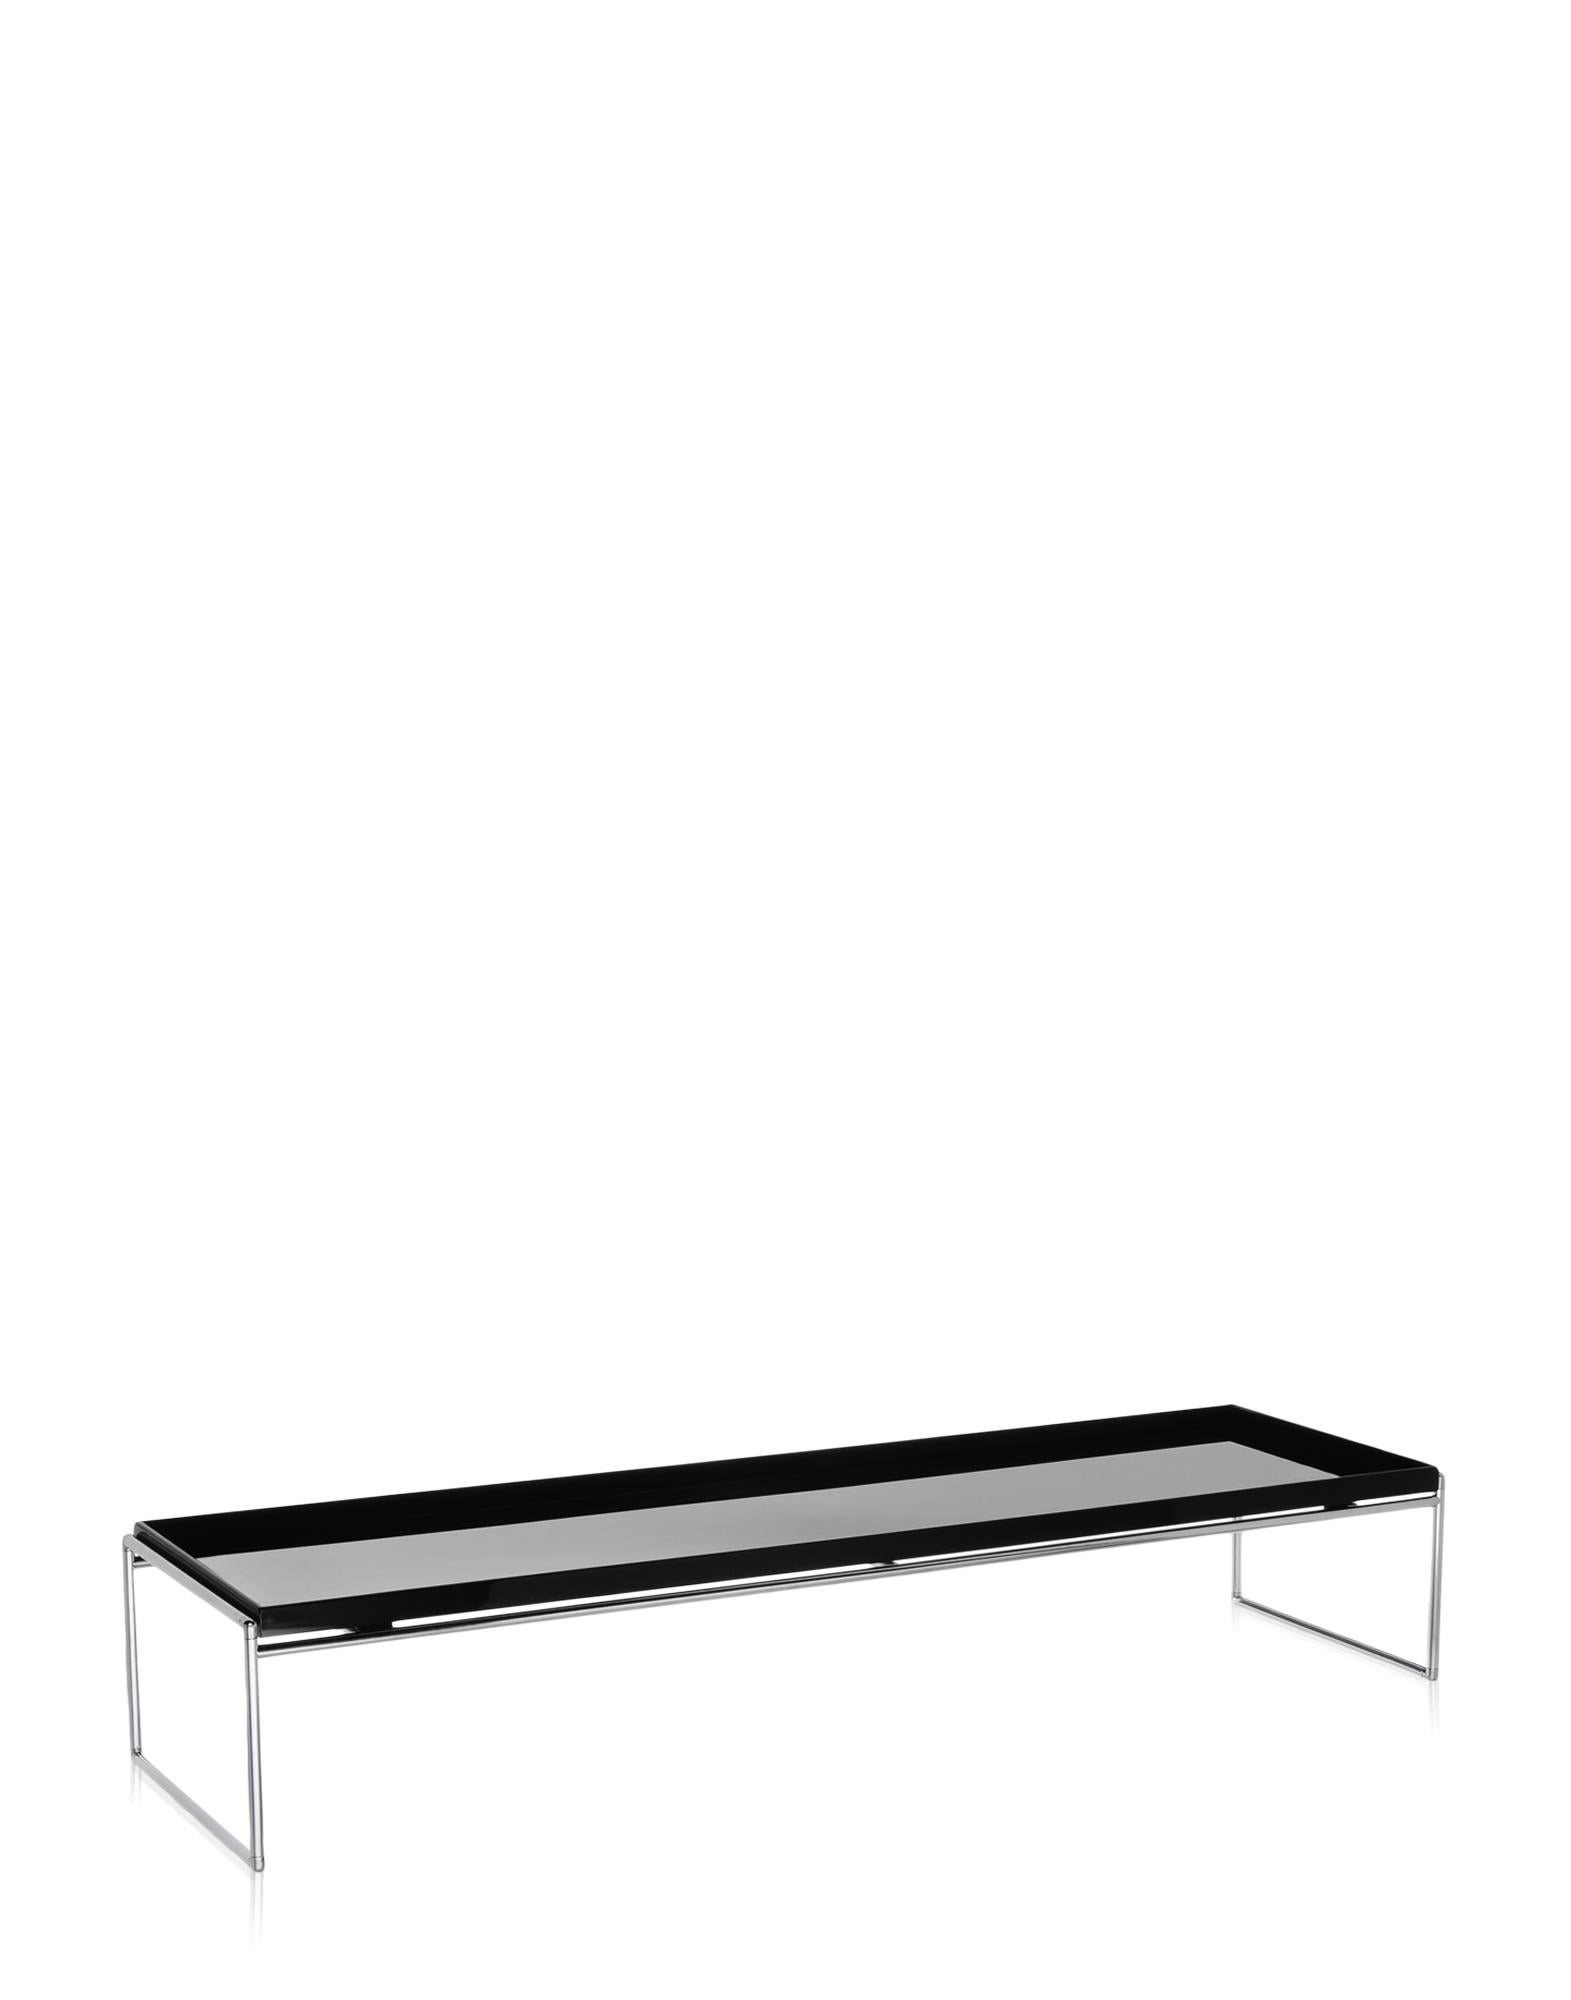 Kartell Rectangular Tray Table by Piero Lissoni In New Condition For Sale In Brooklyn, NY